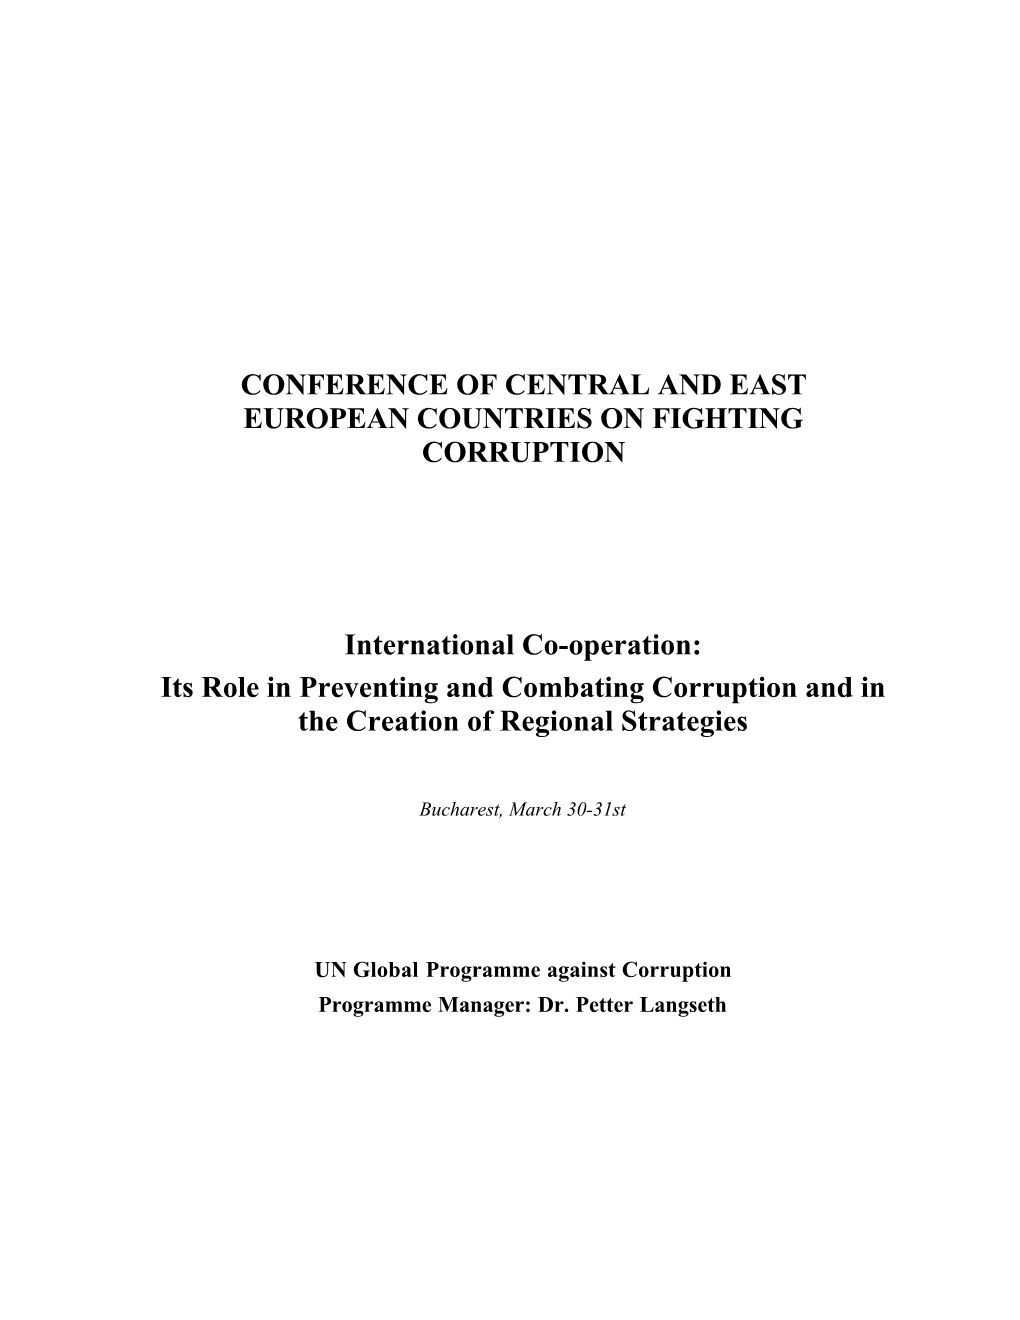 Conference of Central and East European Countries on Fighting Corruption